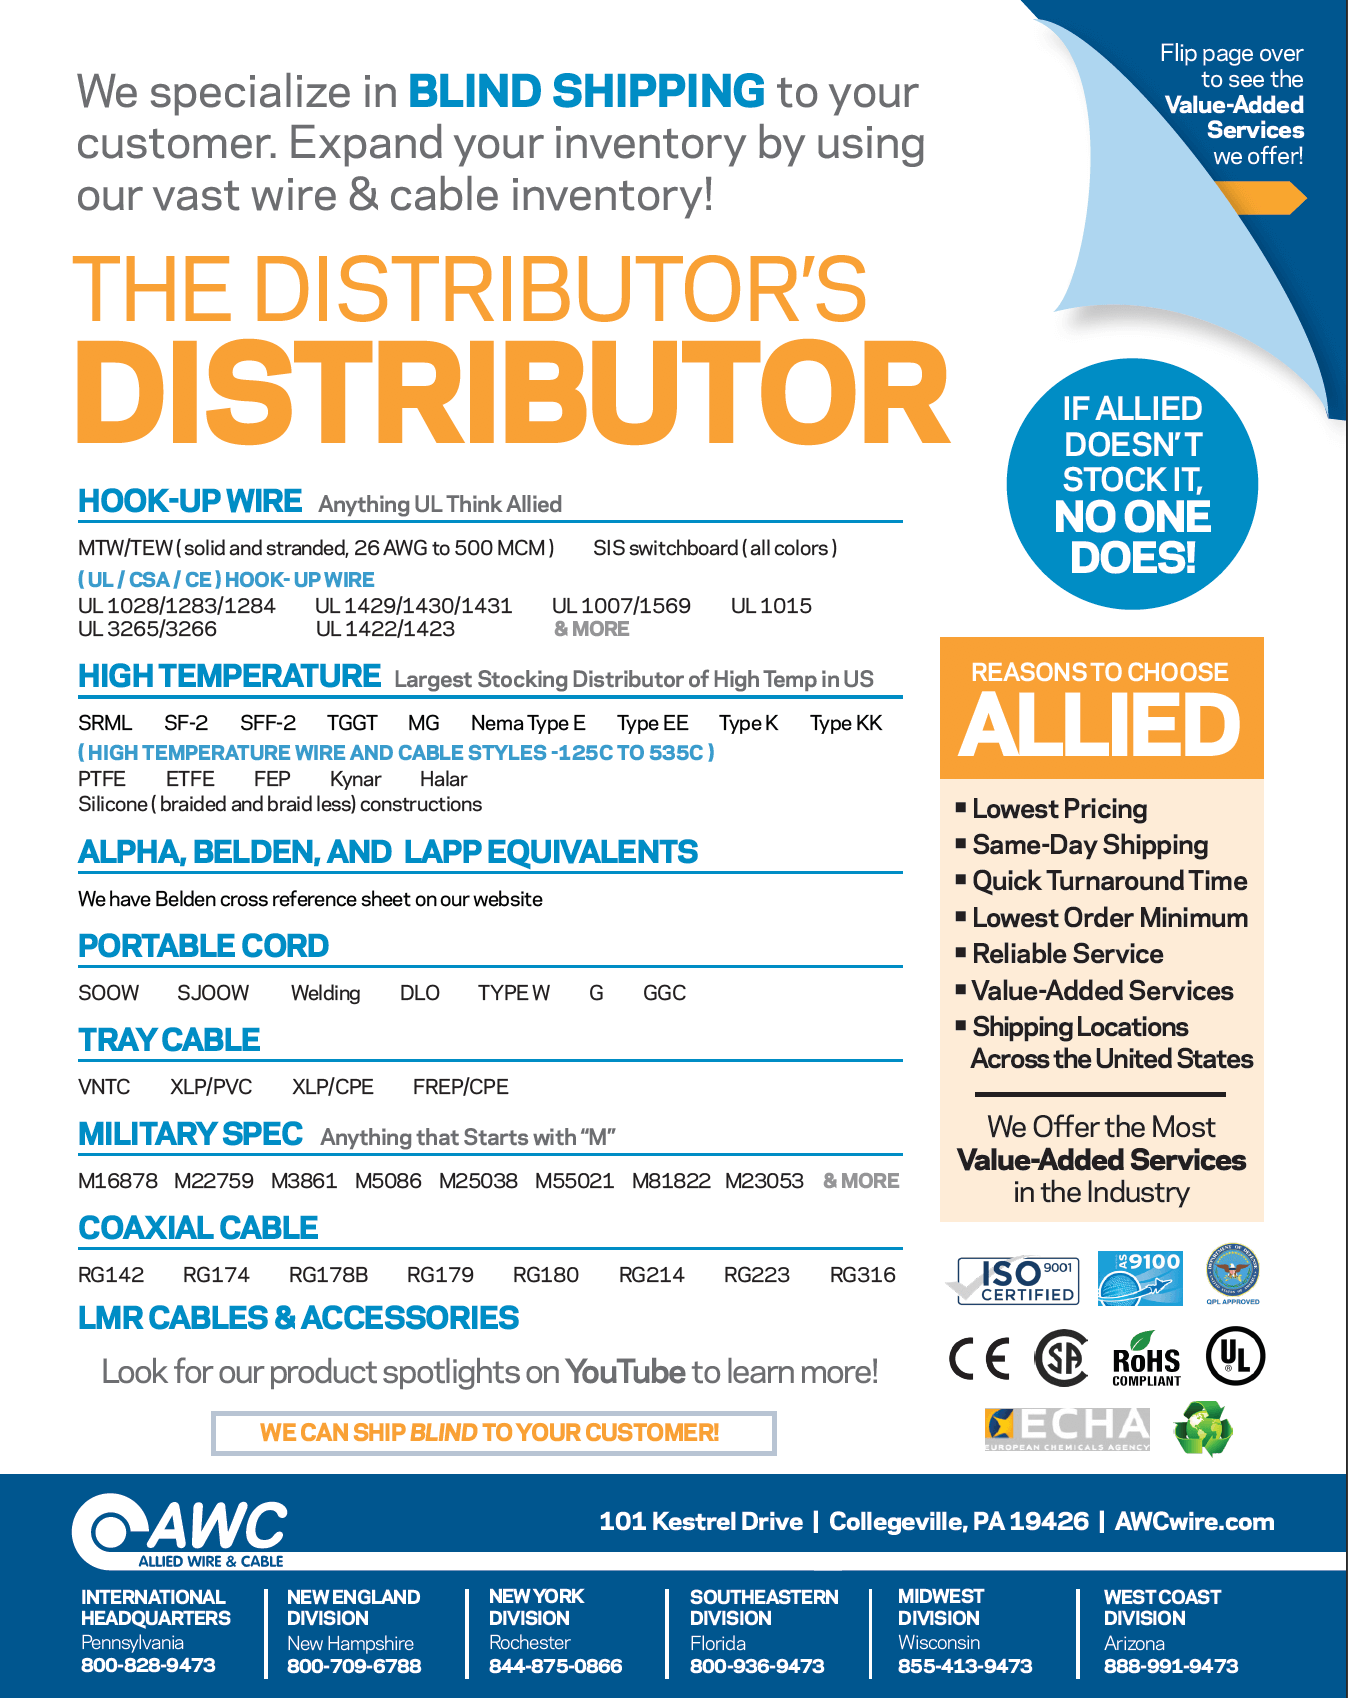 Distributor's Line Card from Allied Wire & Cable